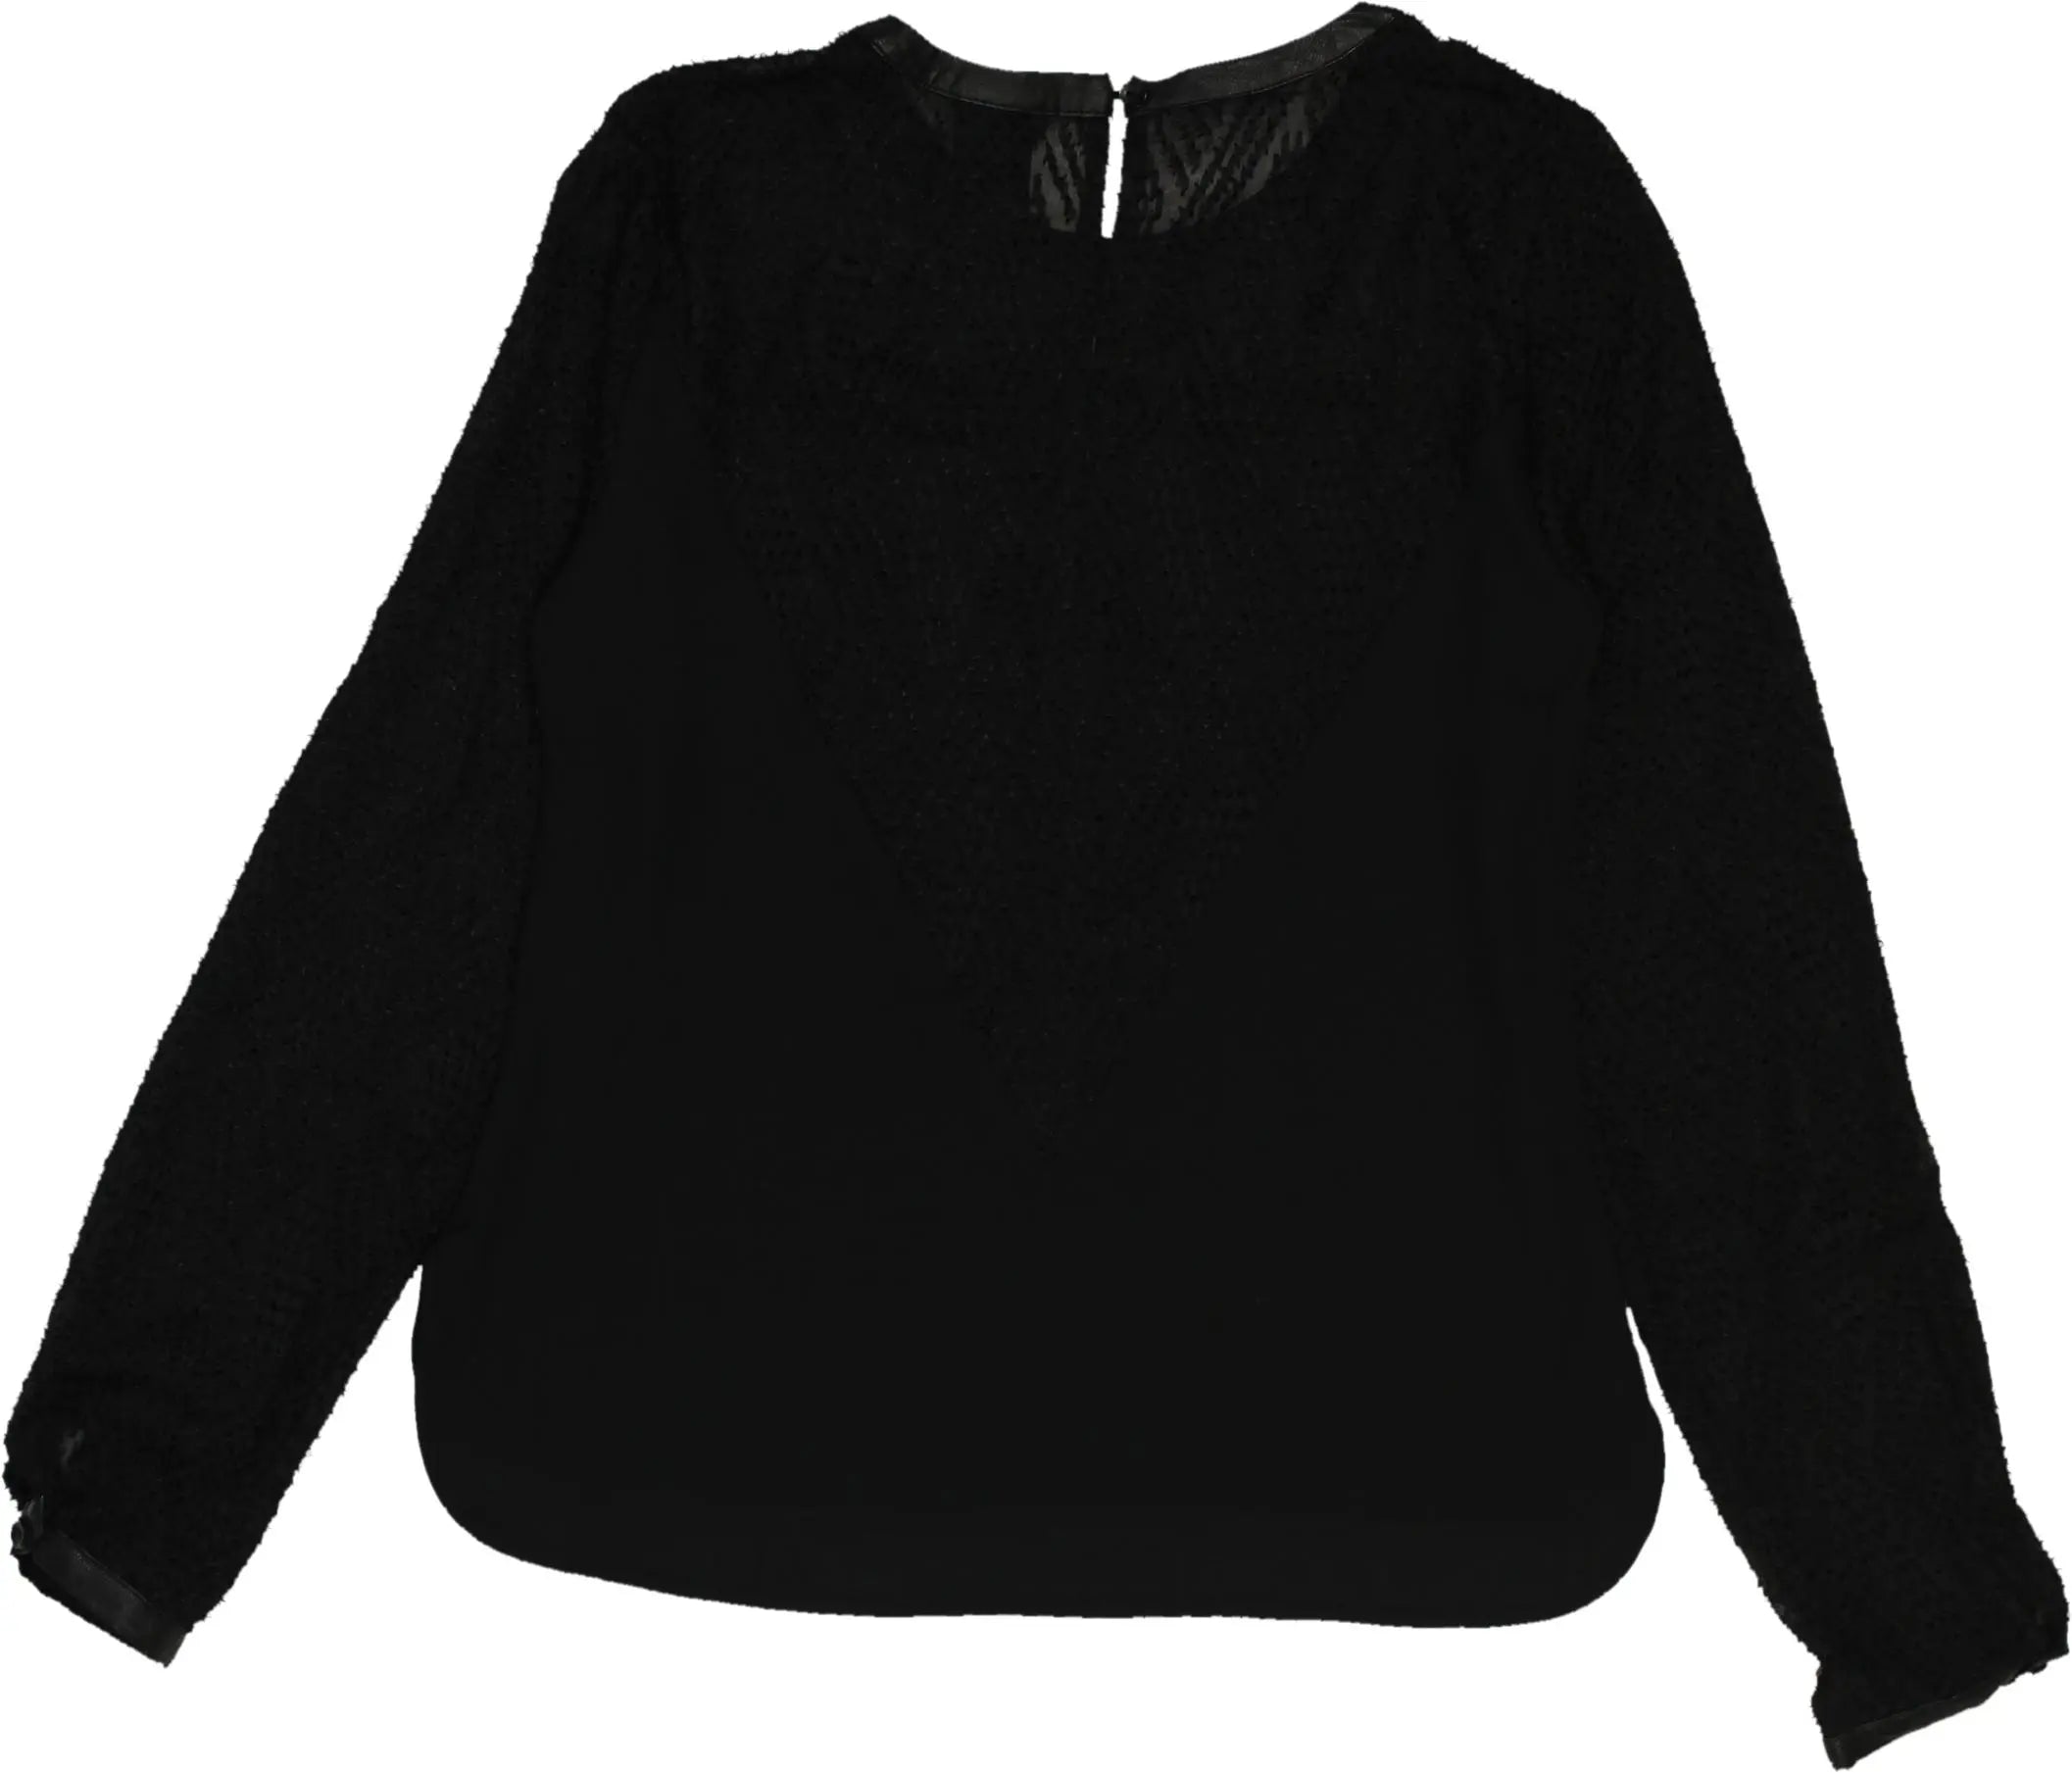 Vero Moda - Long Sleeve Top- ThriftTale.com - Vintage and second handclothing